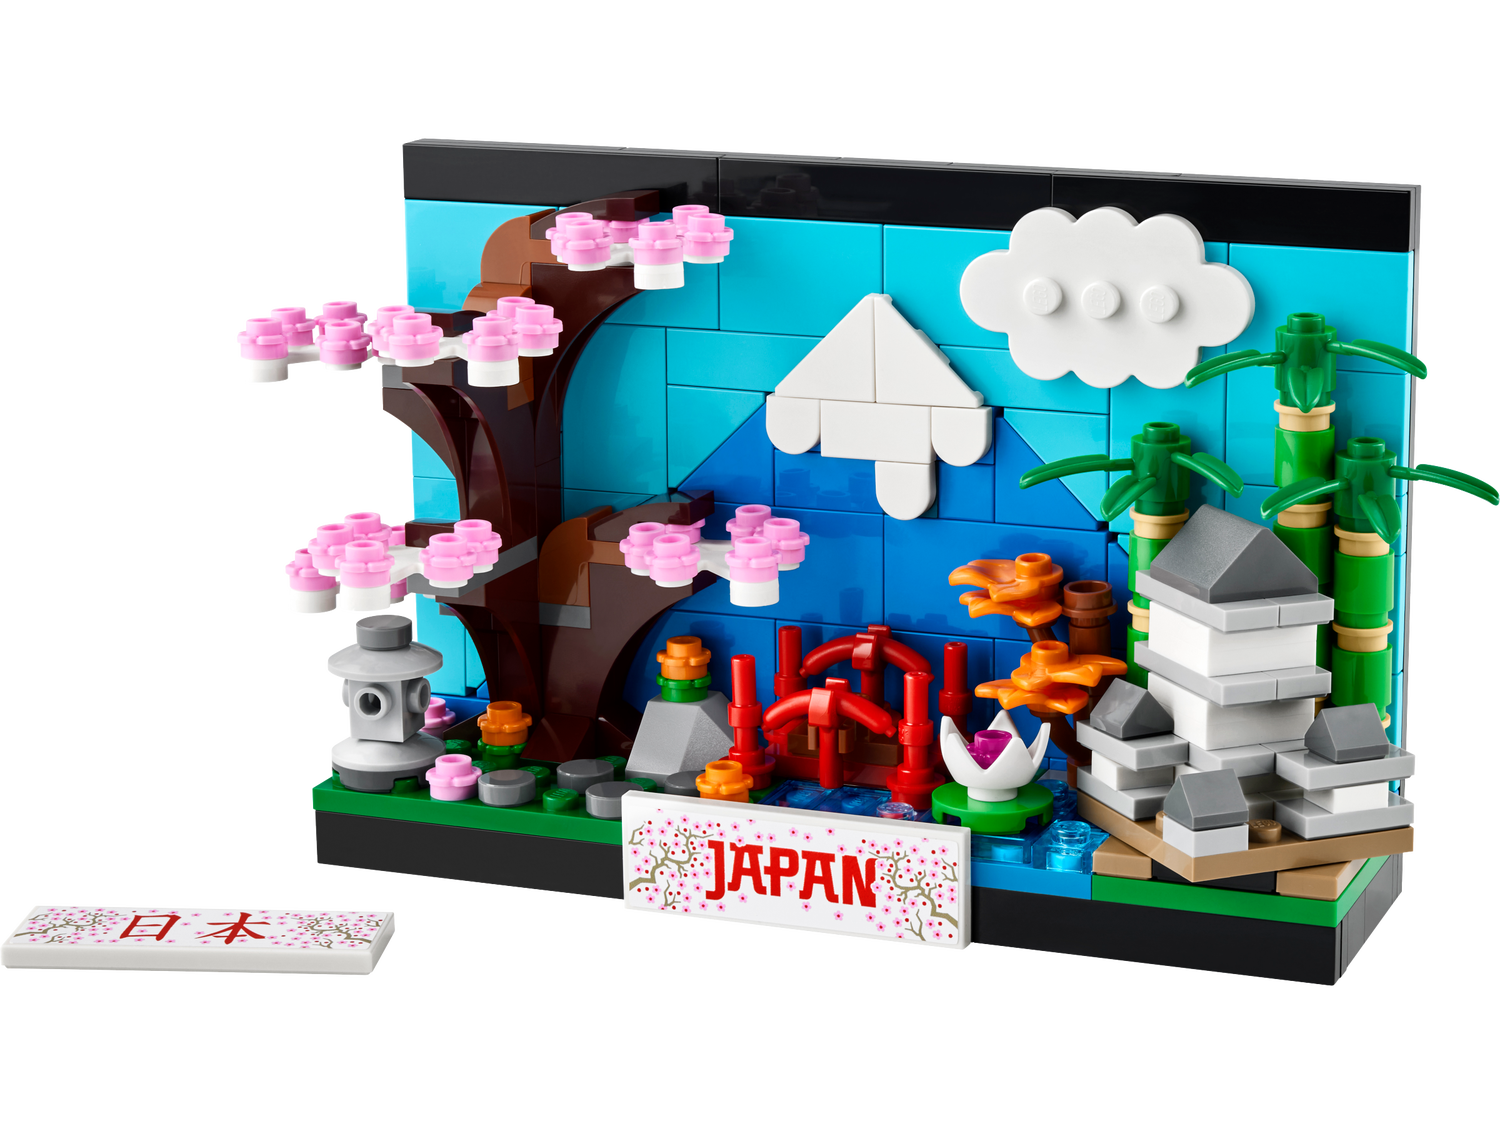 Japan Postcard 40713 | Other | Buy online at the Official LEGO® Shop US